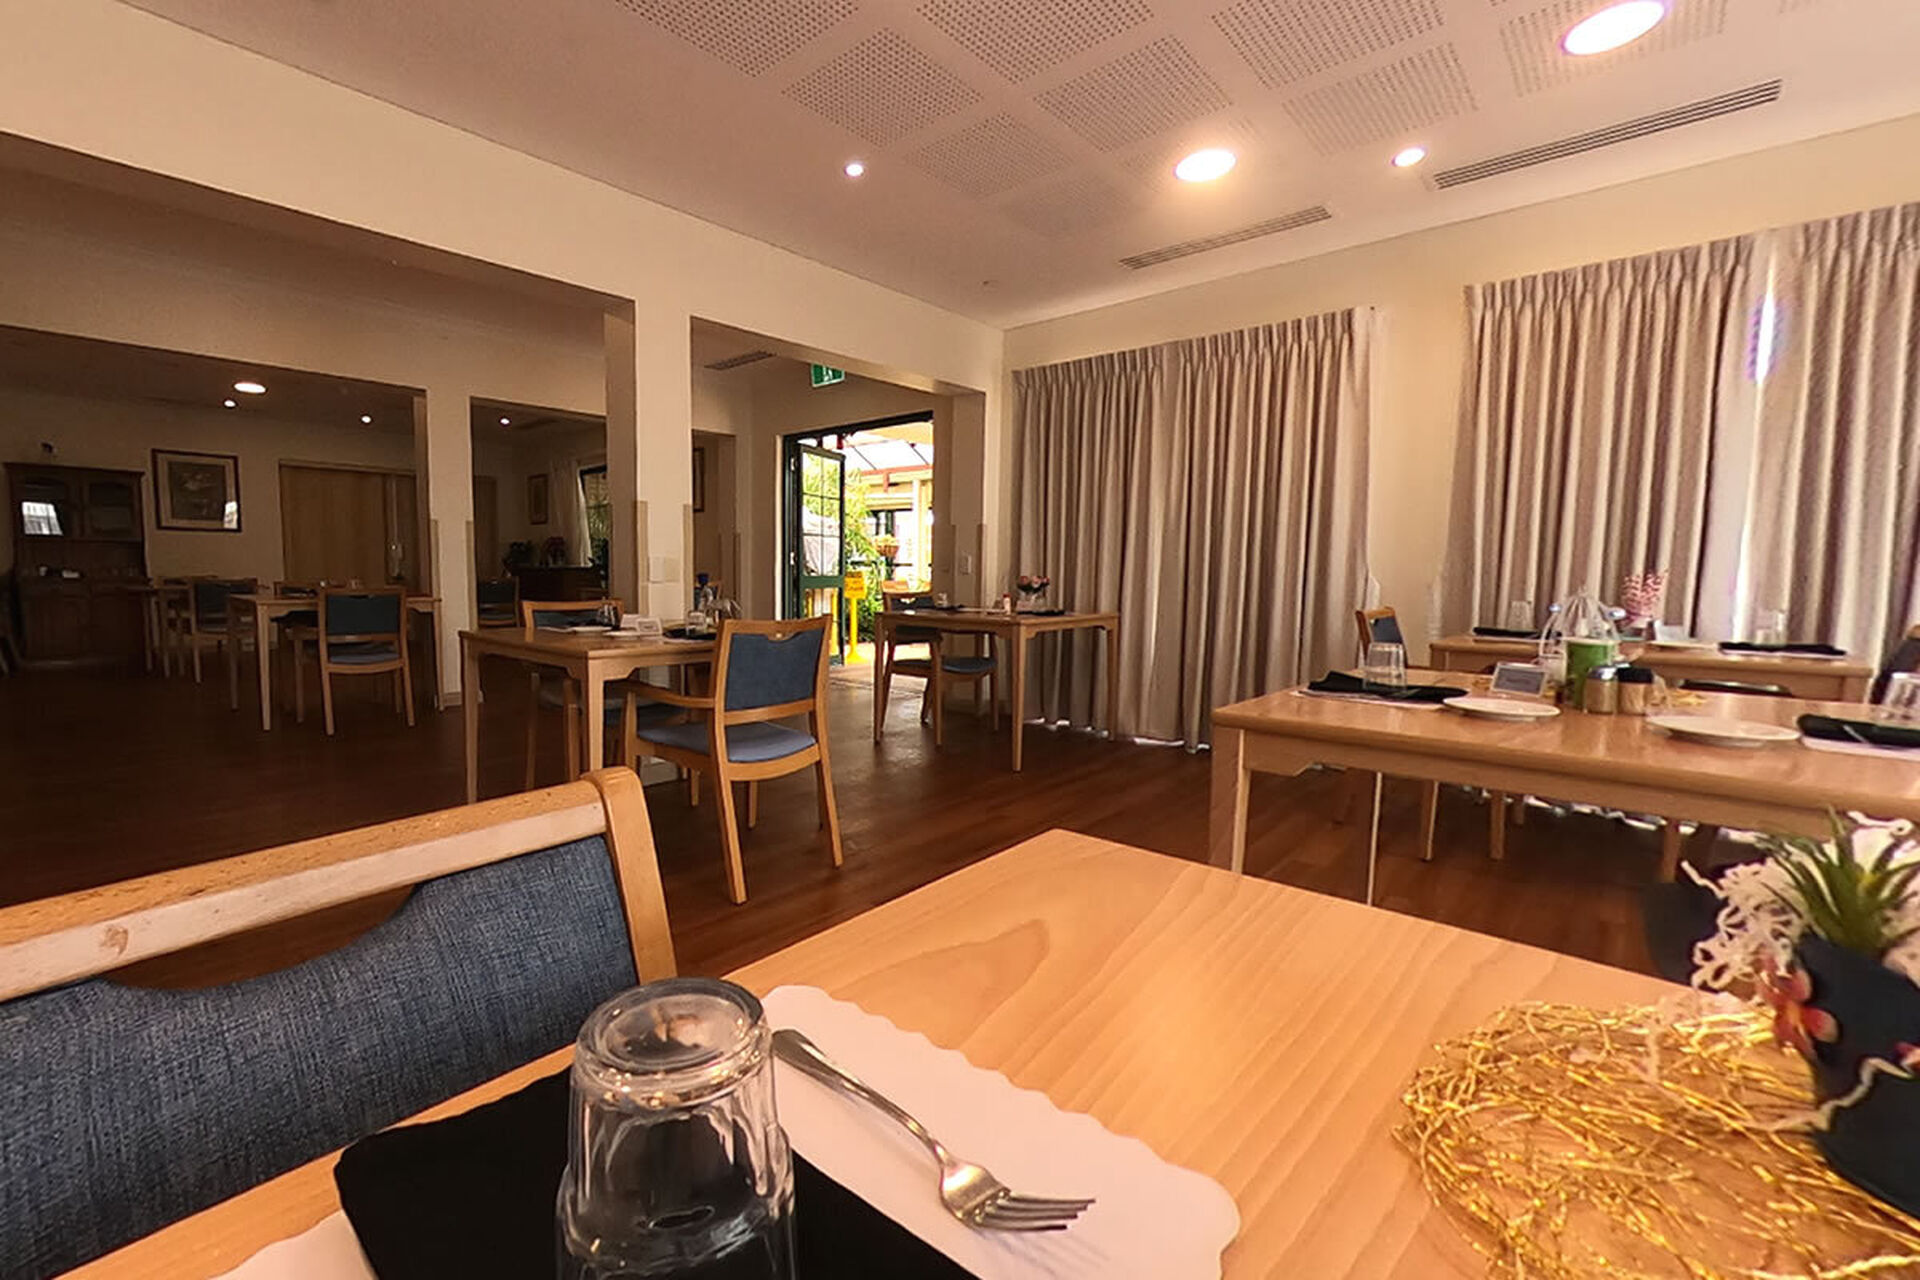 modern communal dining room for nursing home residents to be served fresh meals at baptistcare william carey court aged care home in busselton wa